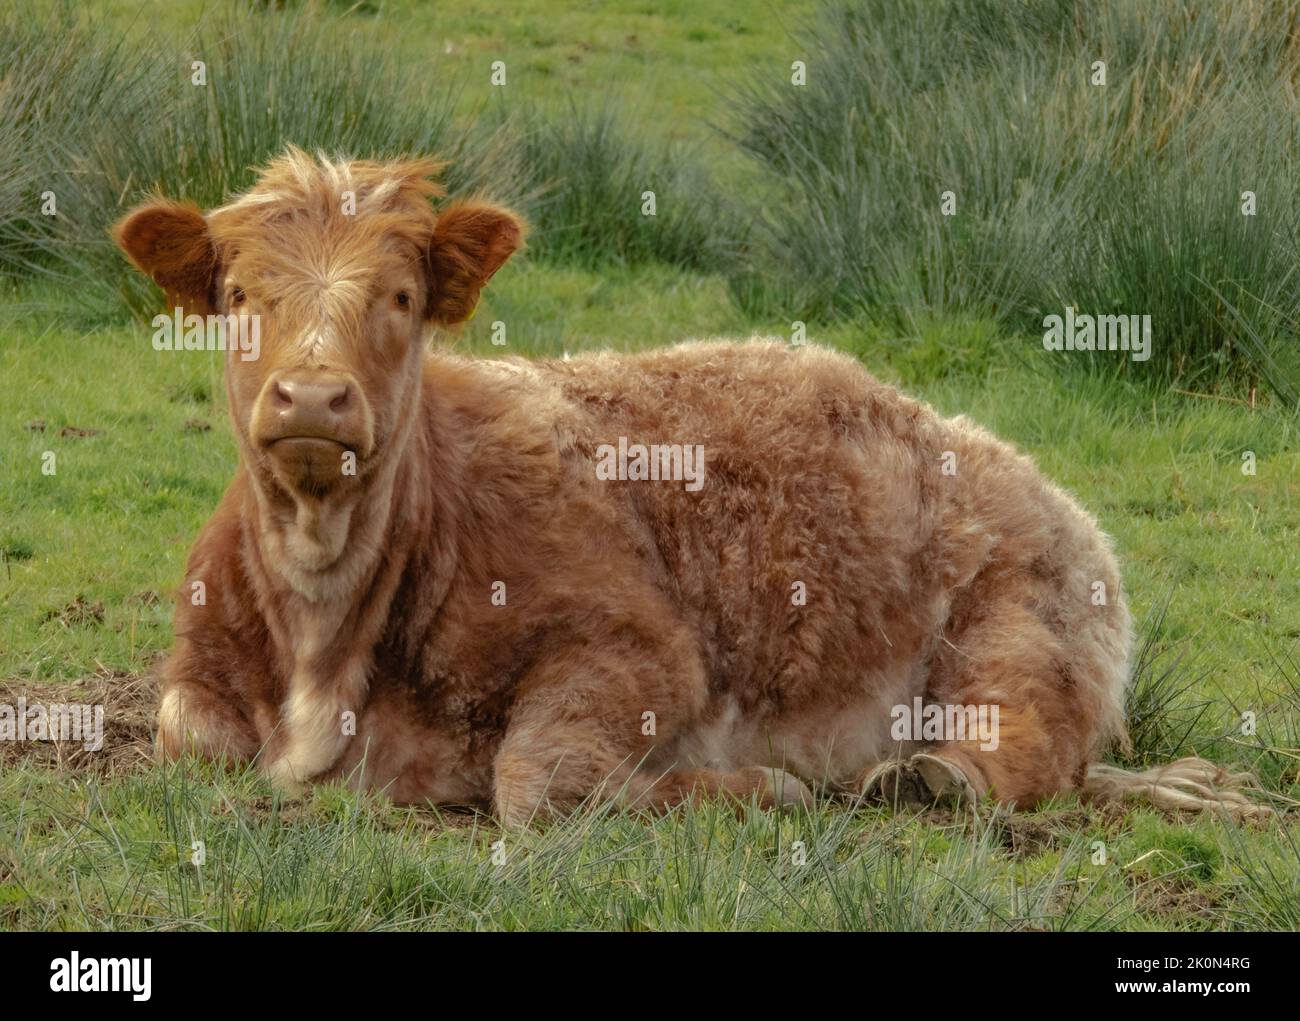 Quirky looking Highland cow calf lay down in a field Stock Photo